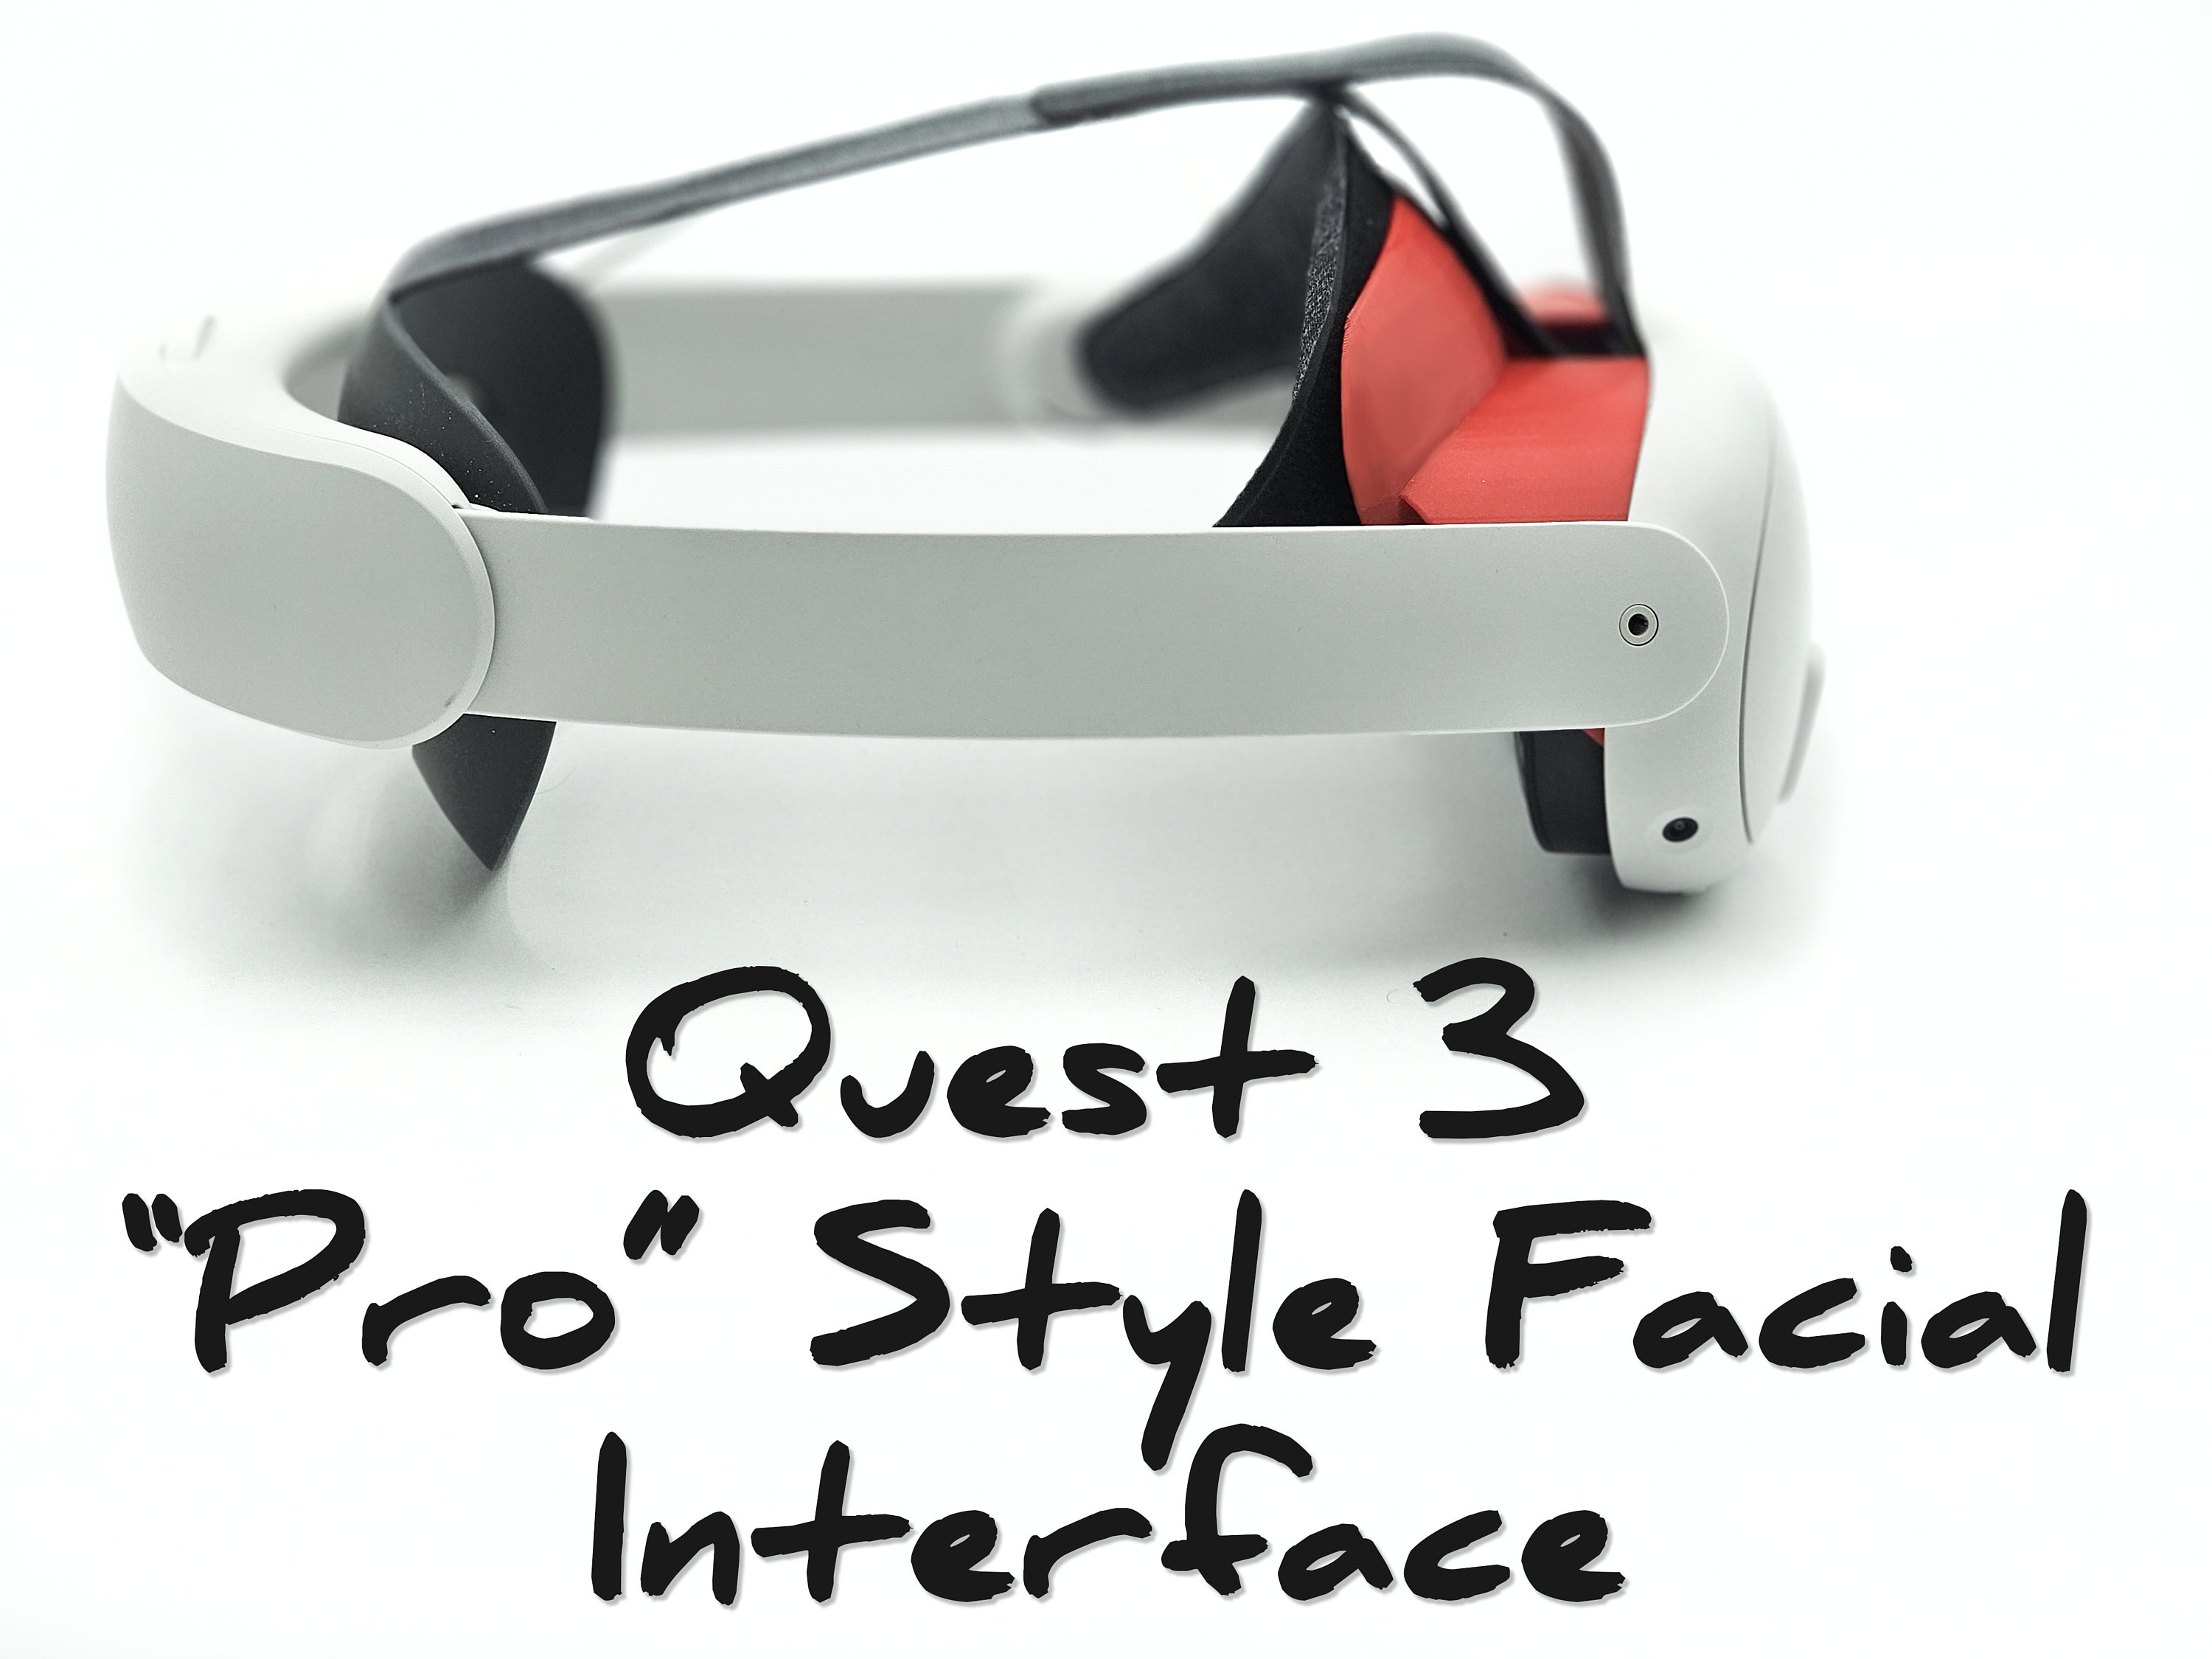 Meta Quest 3 Pro Style Facial Interface 